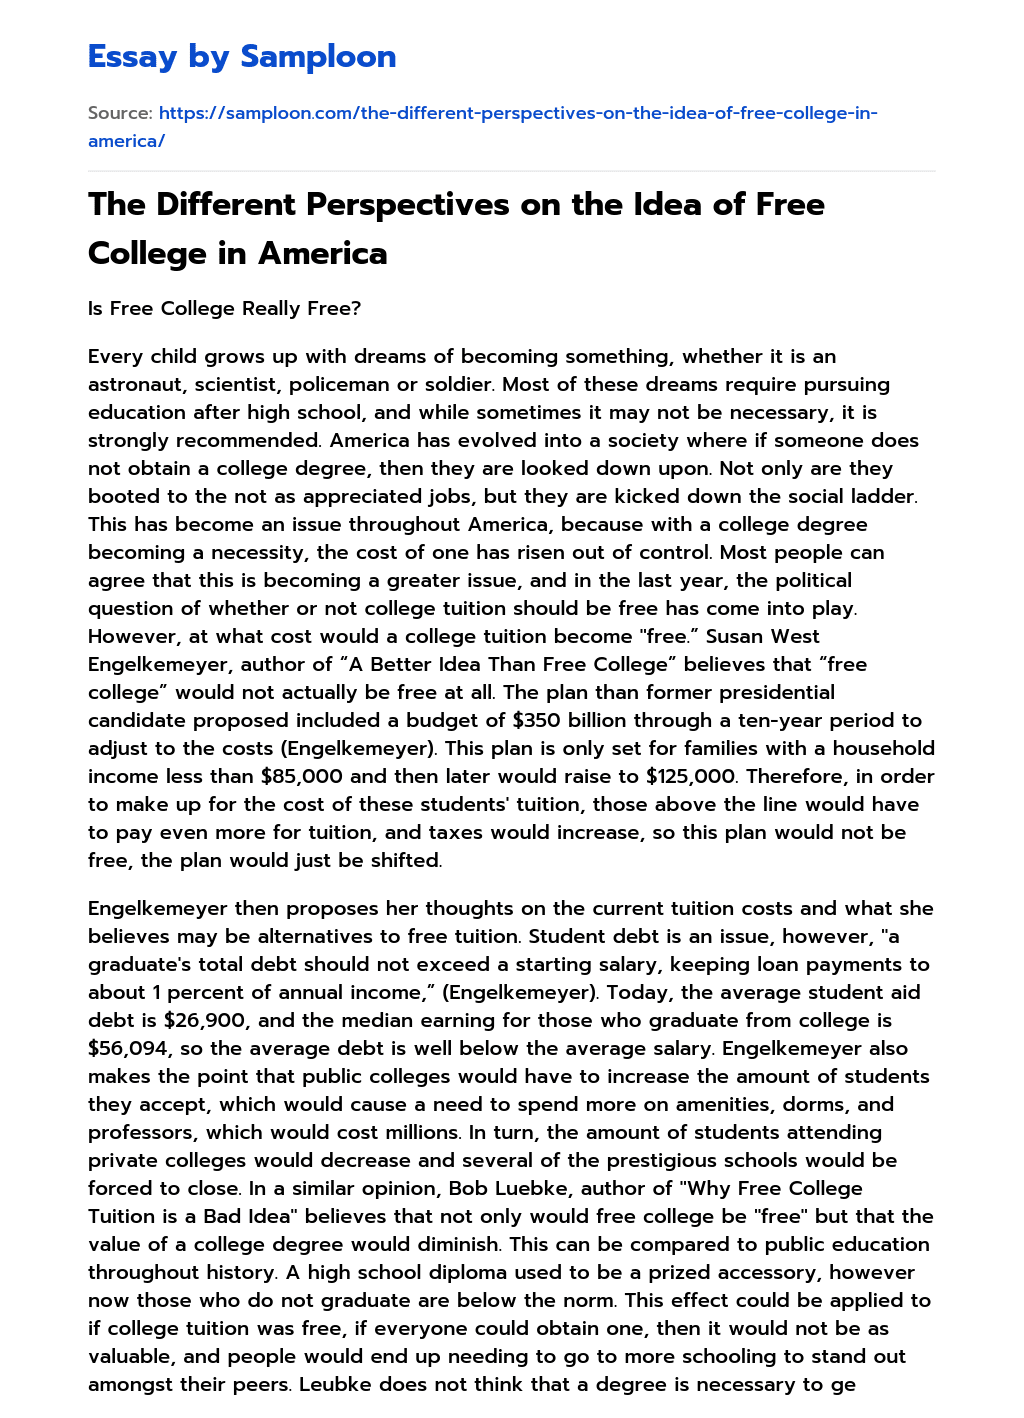 The Different Perspectives on the Idea of Free College in America essay